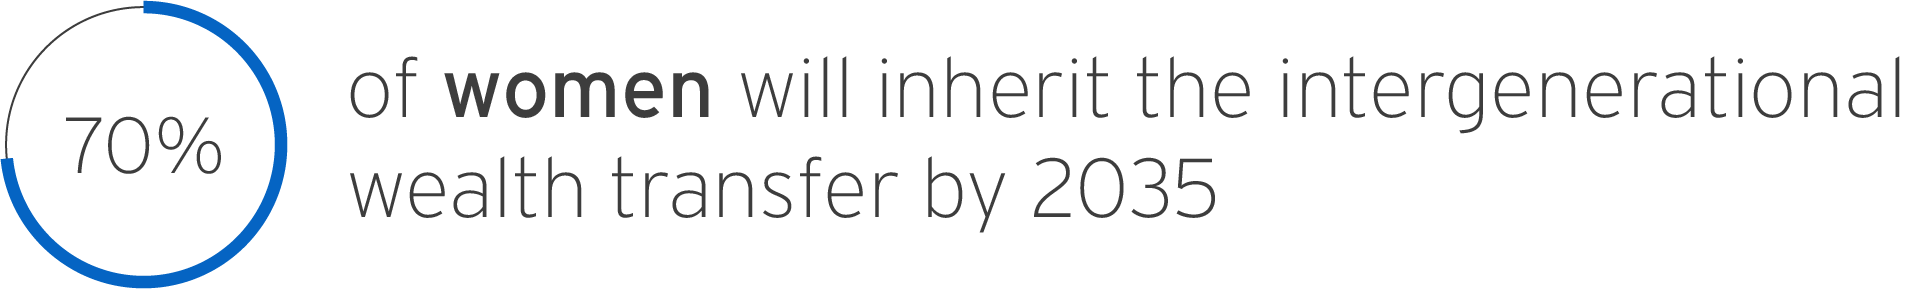 70% of women will inherit the intergenerational wealth transfer by 2035